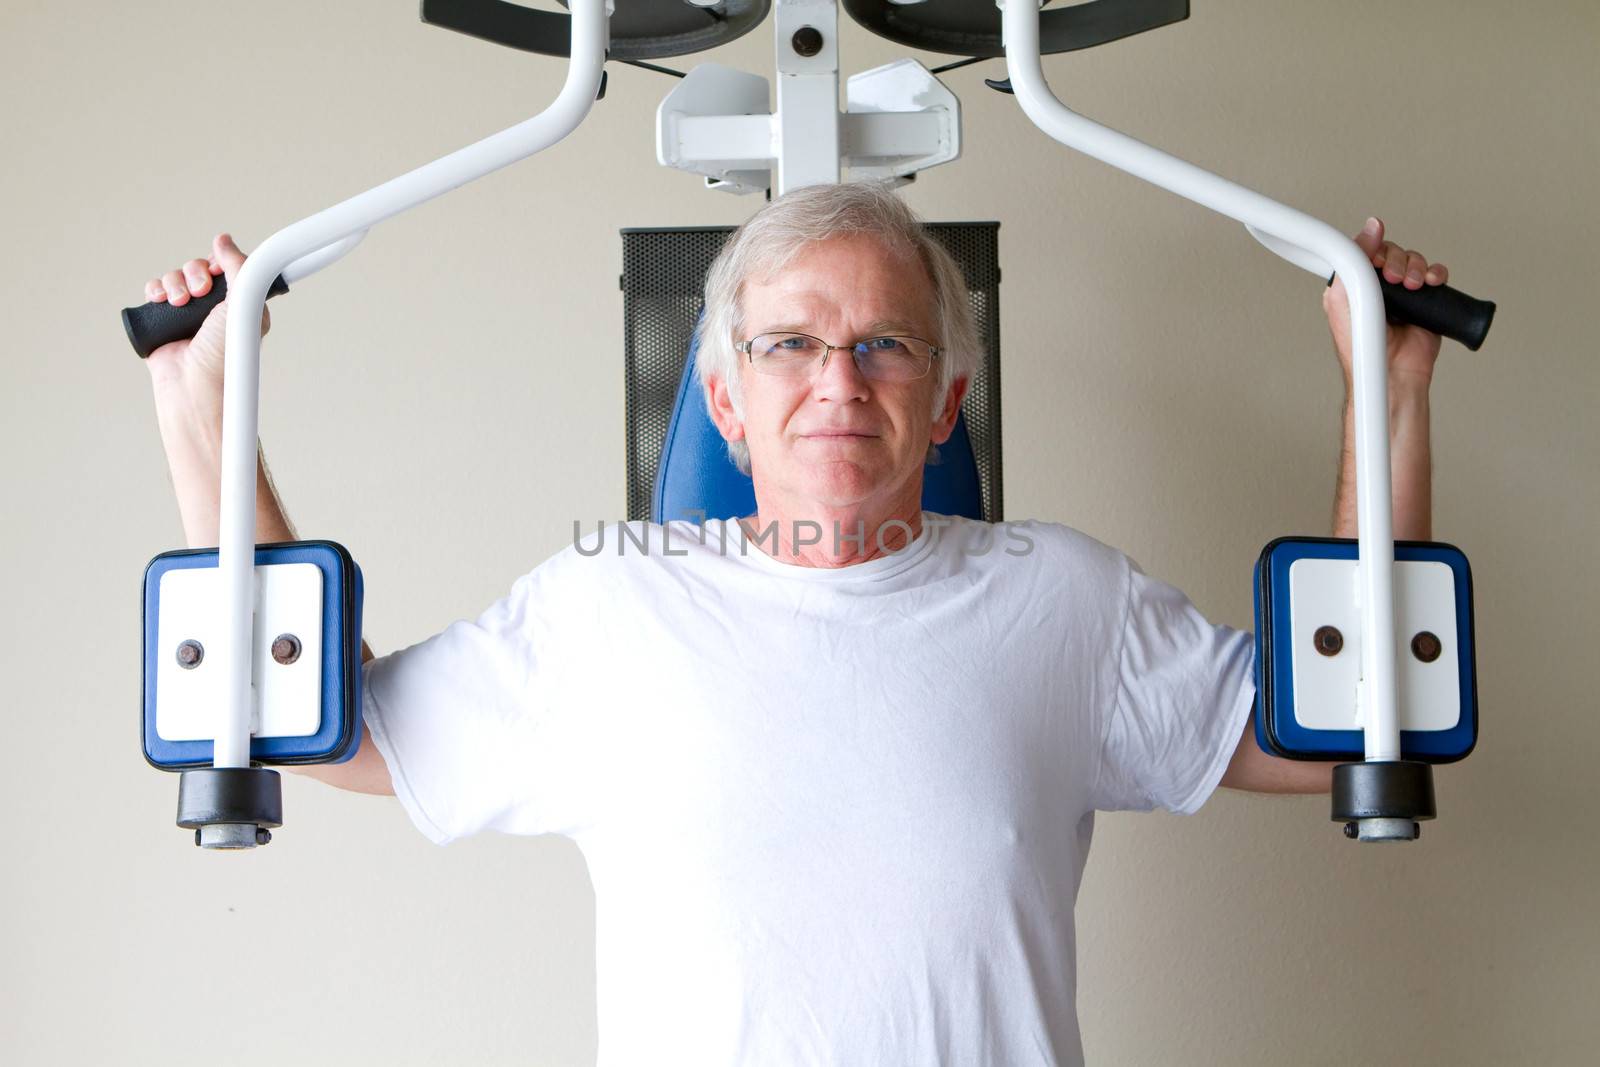 Elderly retired man uses weight training equipment at a gym to improve his health and life.